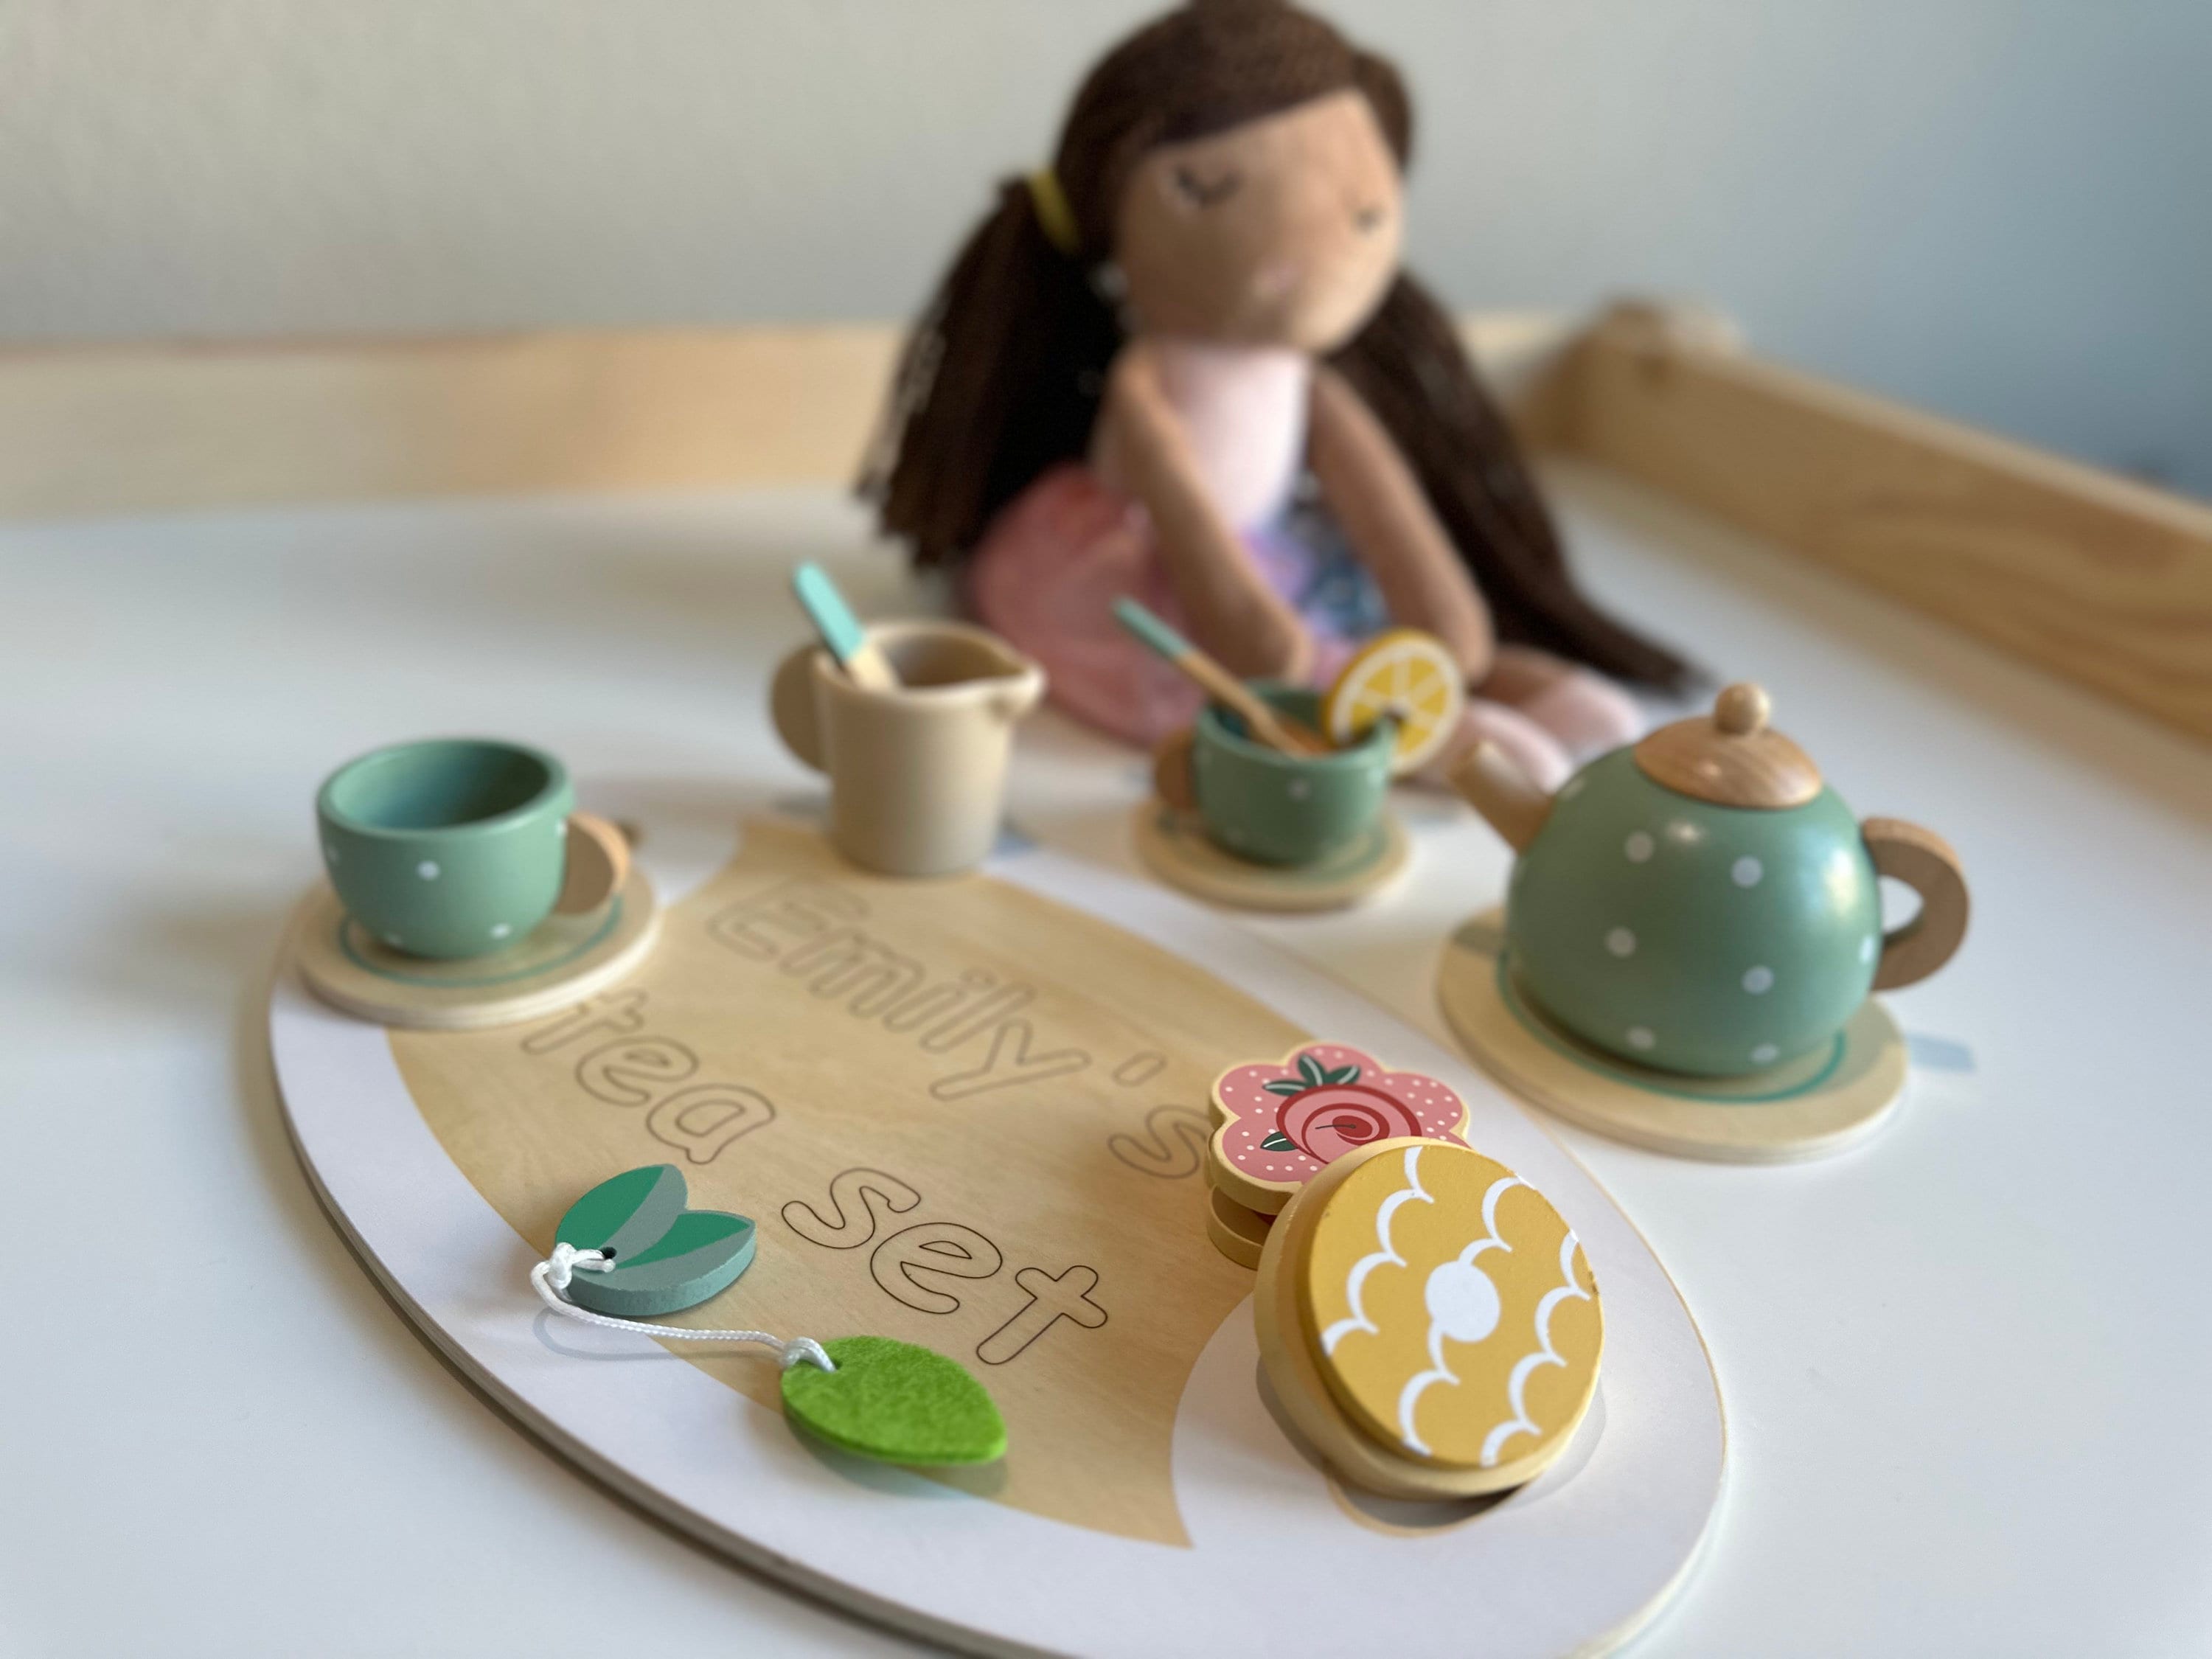 PairPear Wooden Toy Tea Set for Toddler Tea Party with Play Food